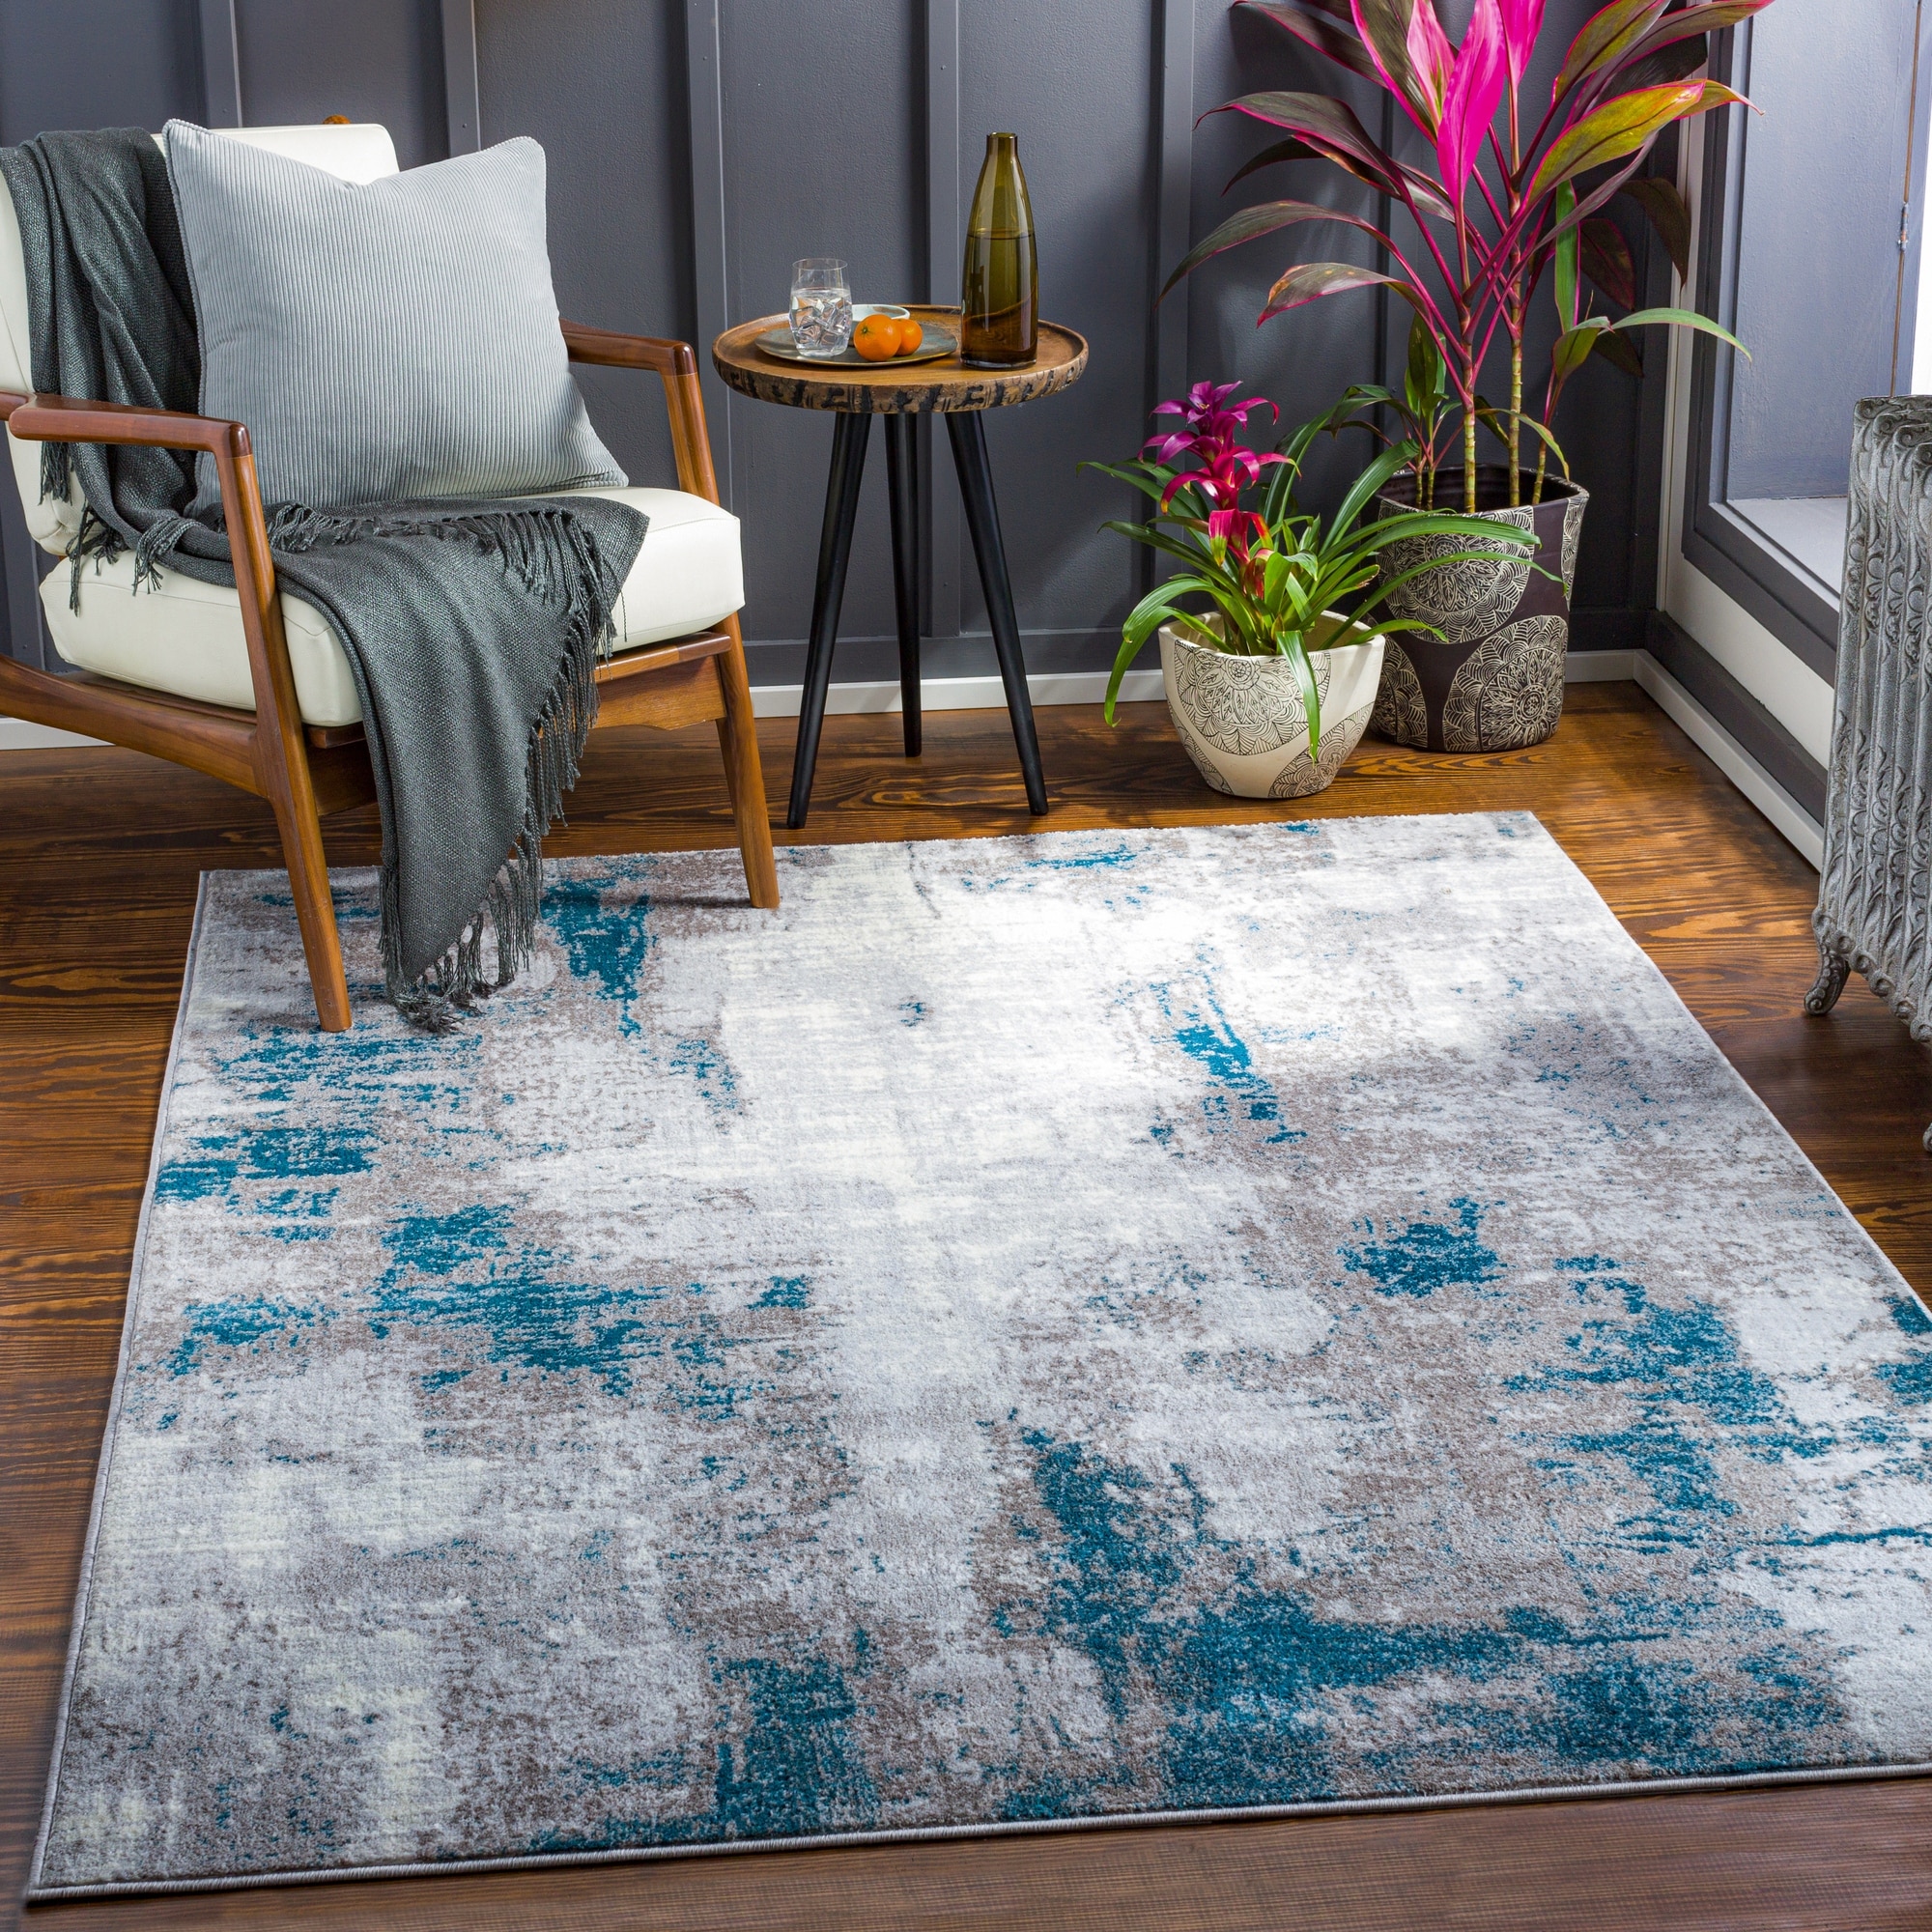 https://ak1.ostkcdn.com/images/products/is/images/direct/2275dabf2e15b4c03903574b70e4c77684c3becb/Cooke-Industrial-Abstract-Polyester-Area-Rug.jpg